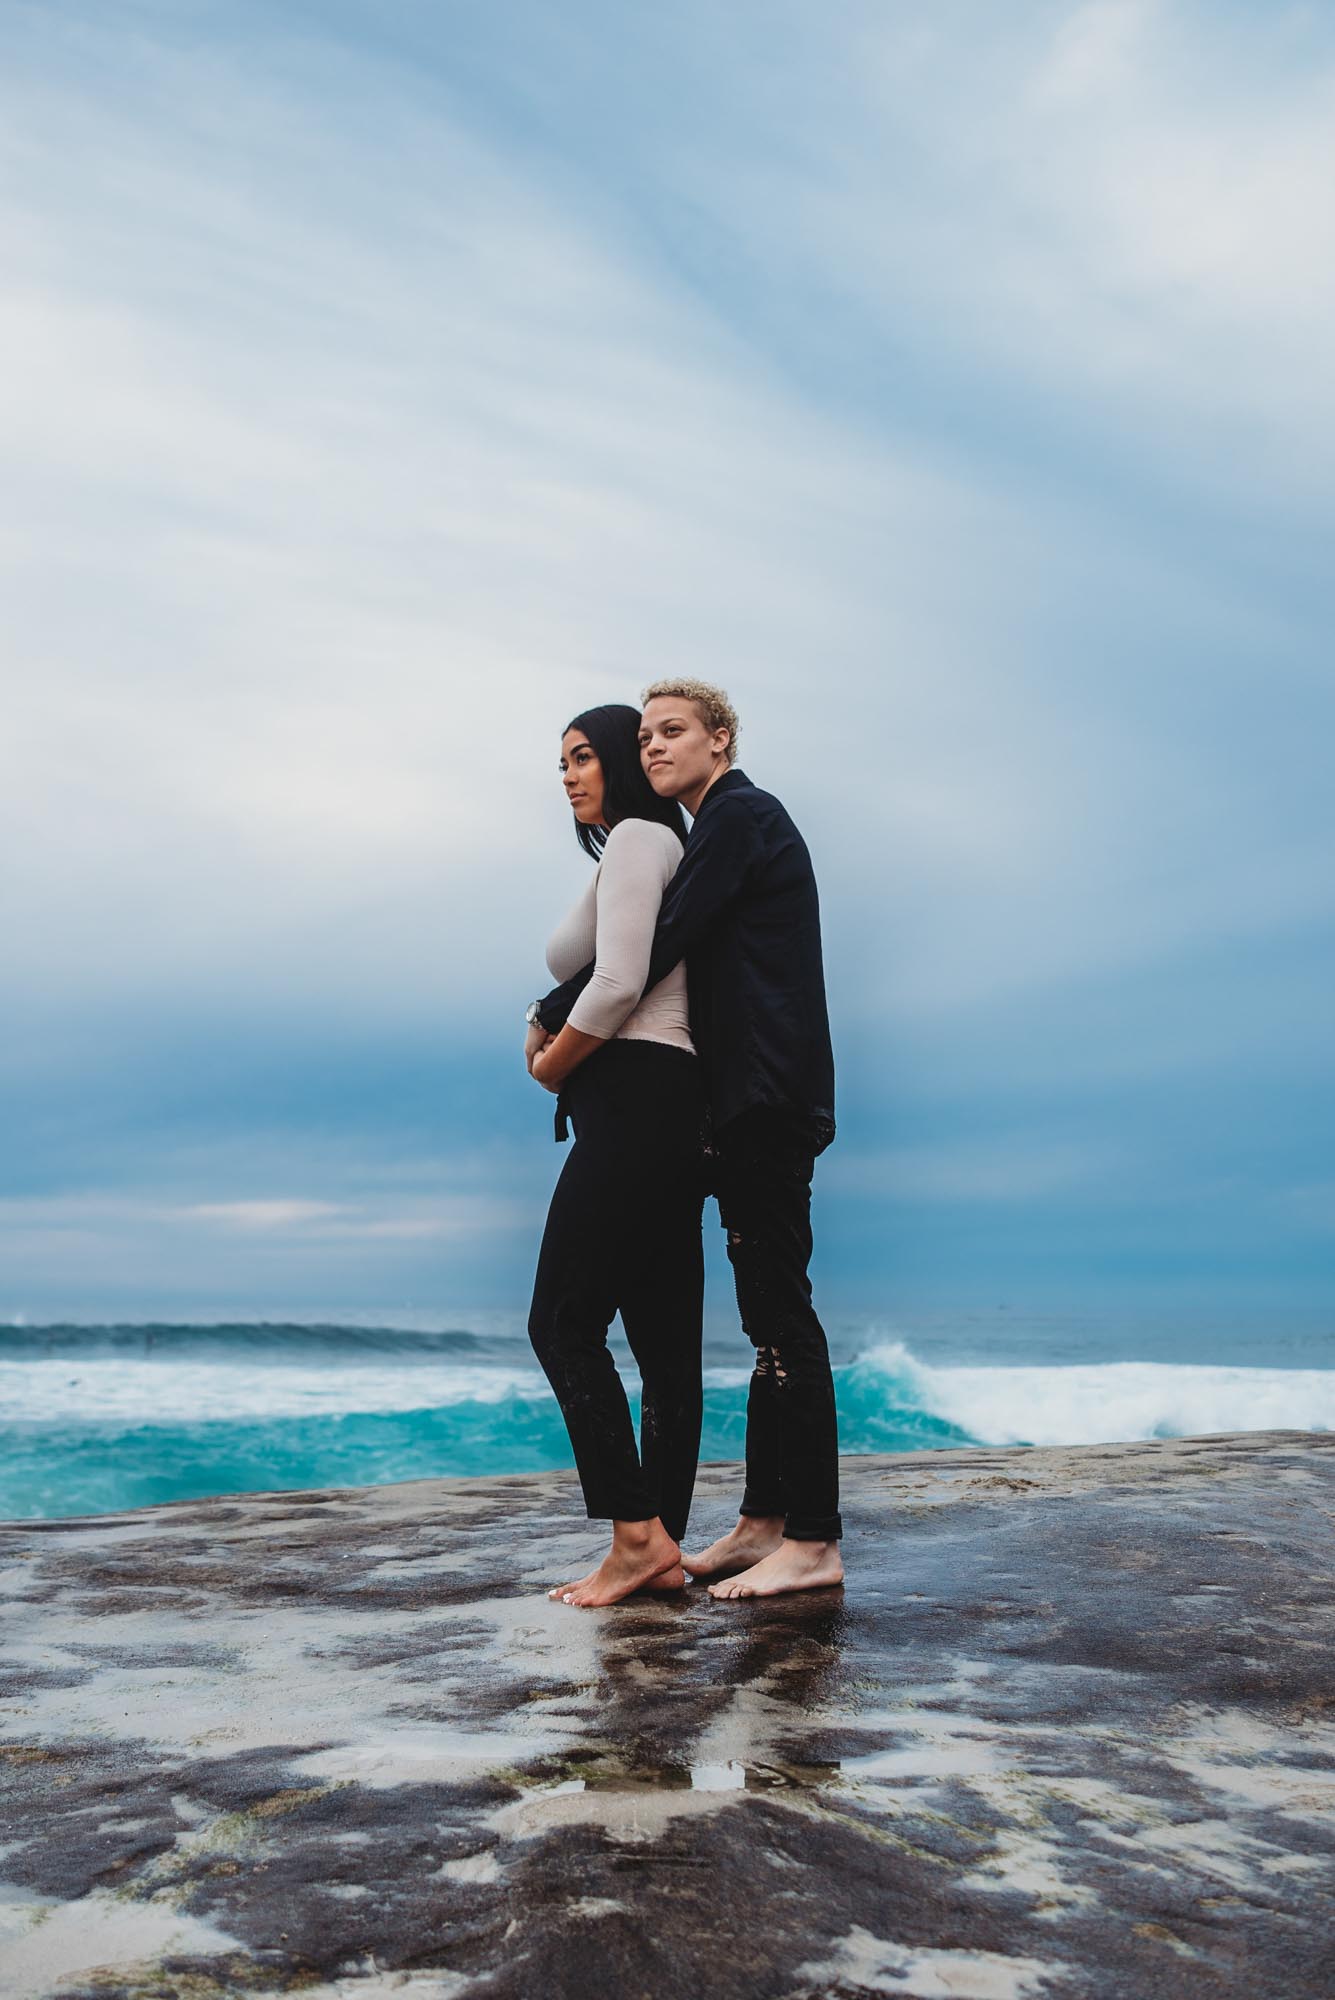 Romantic beach photo shoot to celebrate whirlwind engagement and wedding | Brittany V Photography | Featured on Equally Wed, the leading LGBTQ+ wedding magazine